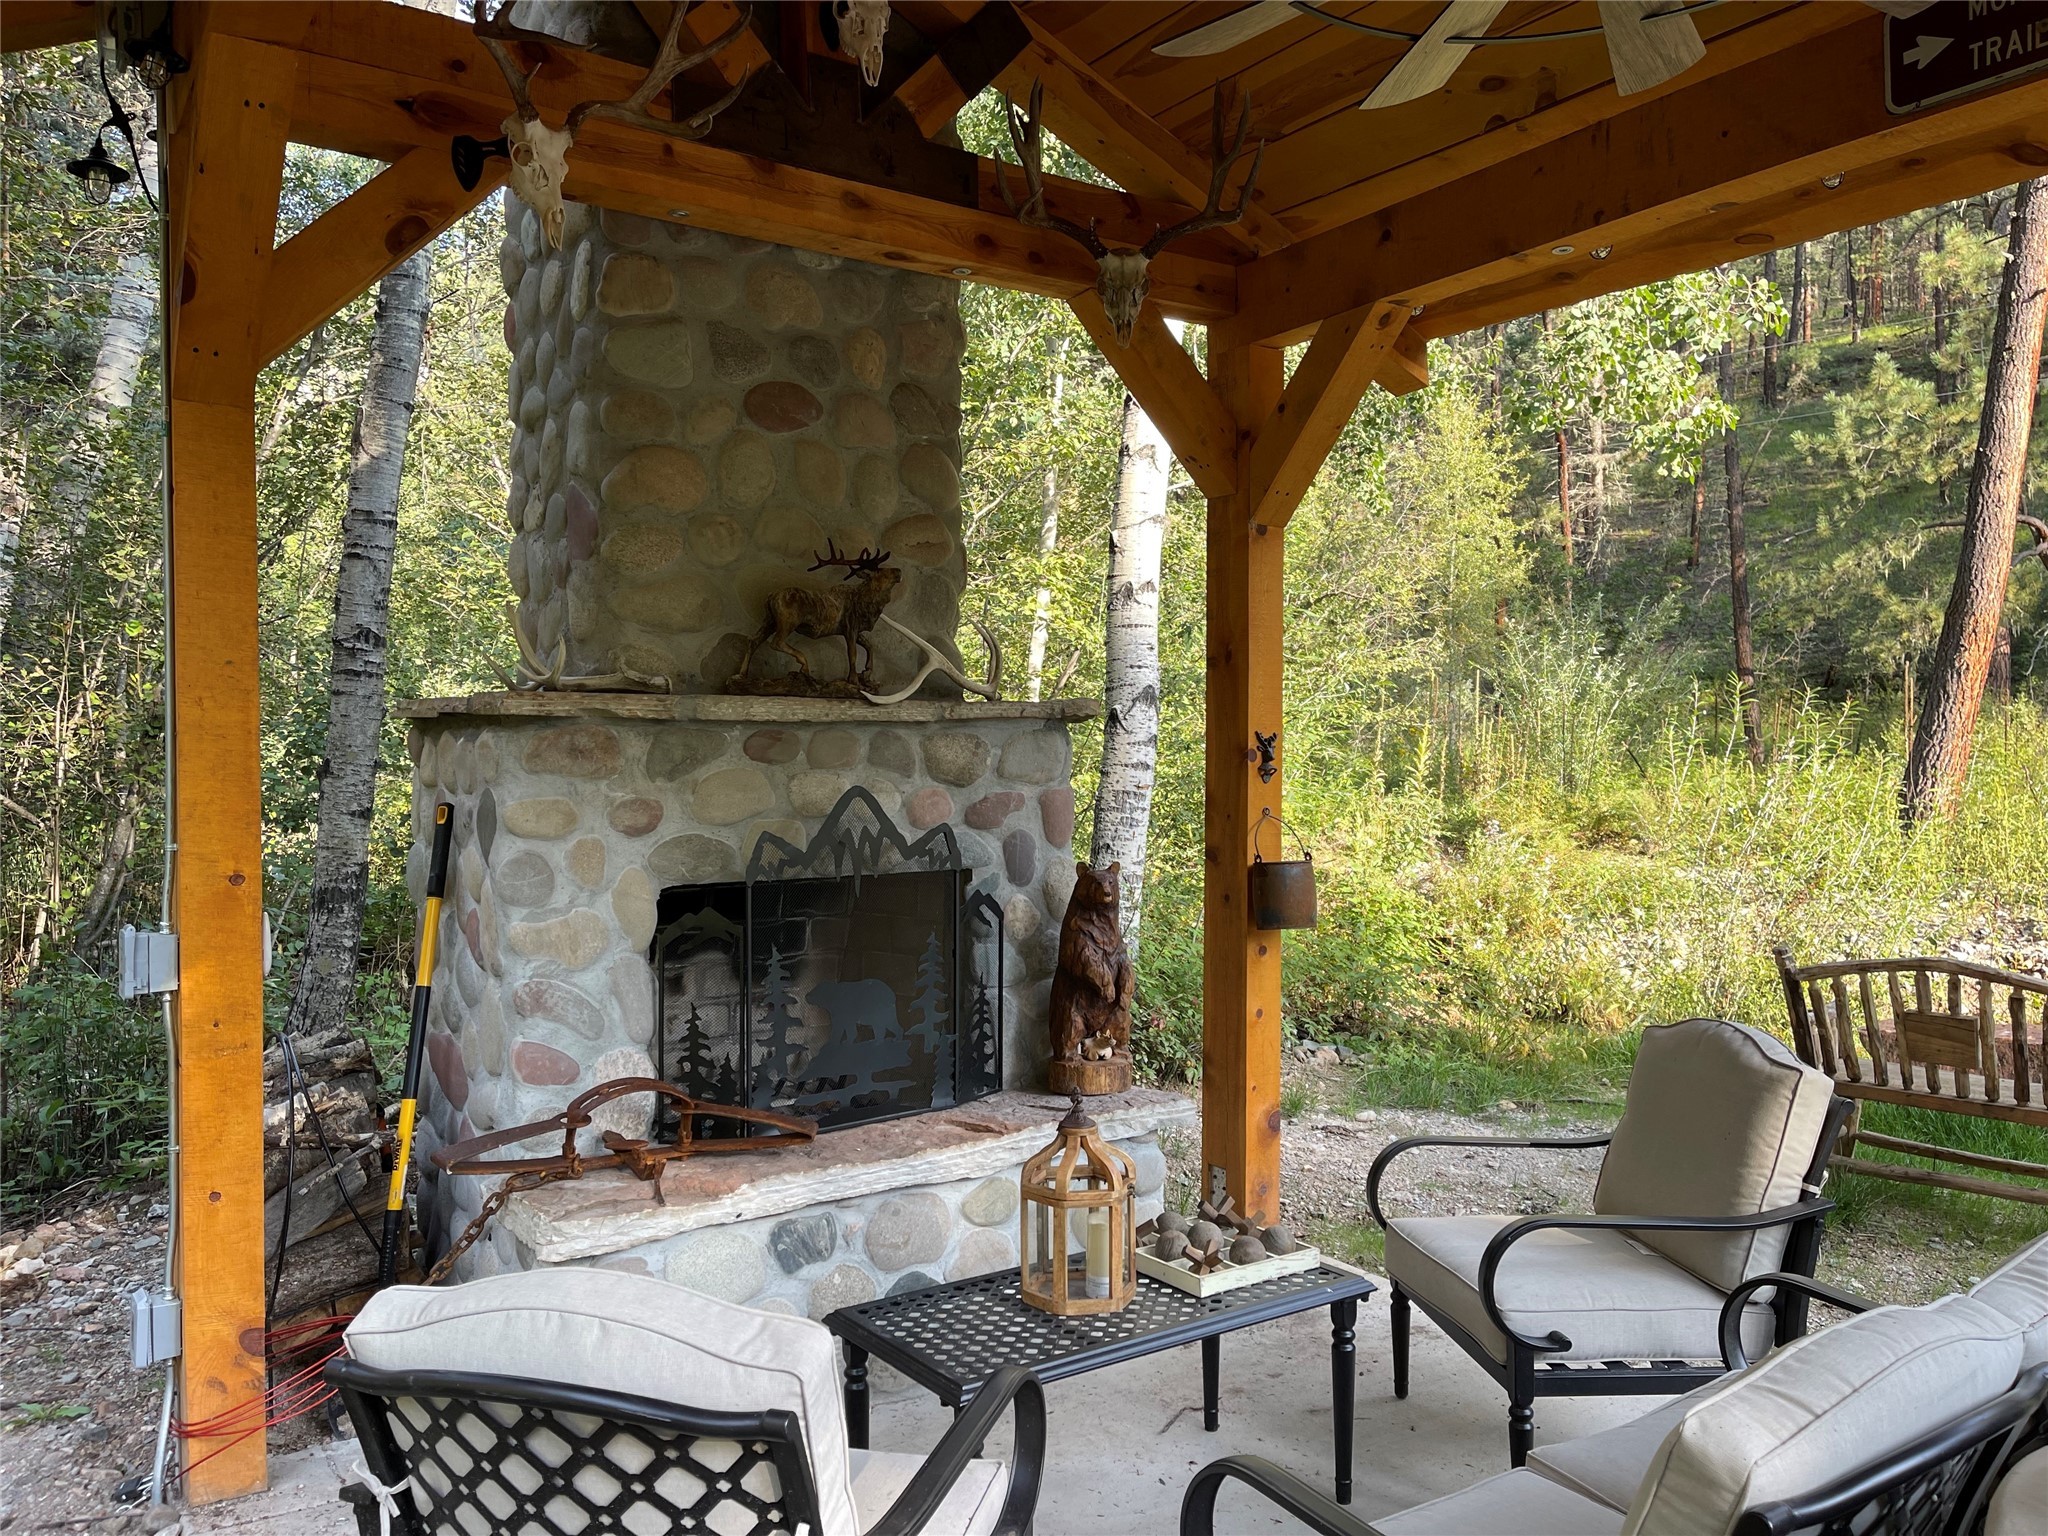 Beautifully crafted pergola and river stone fireplace